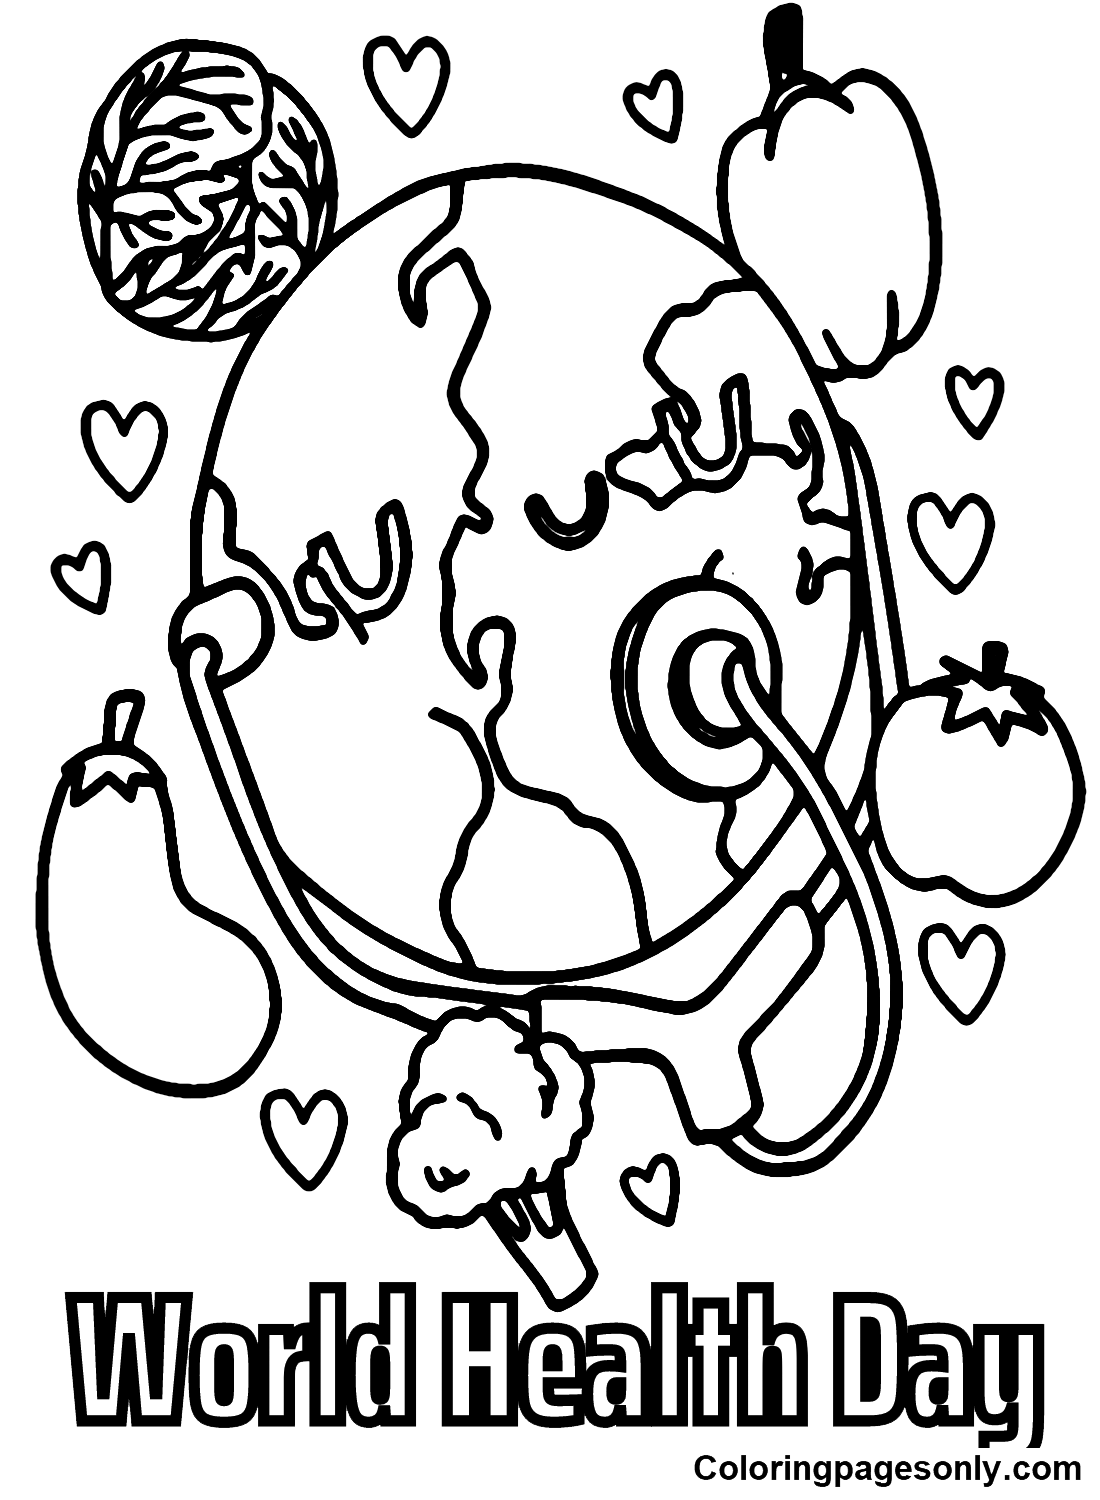 World Health Day for Kids Coloring Page